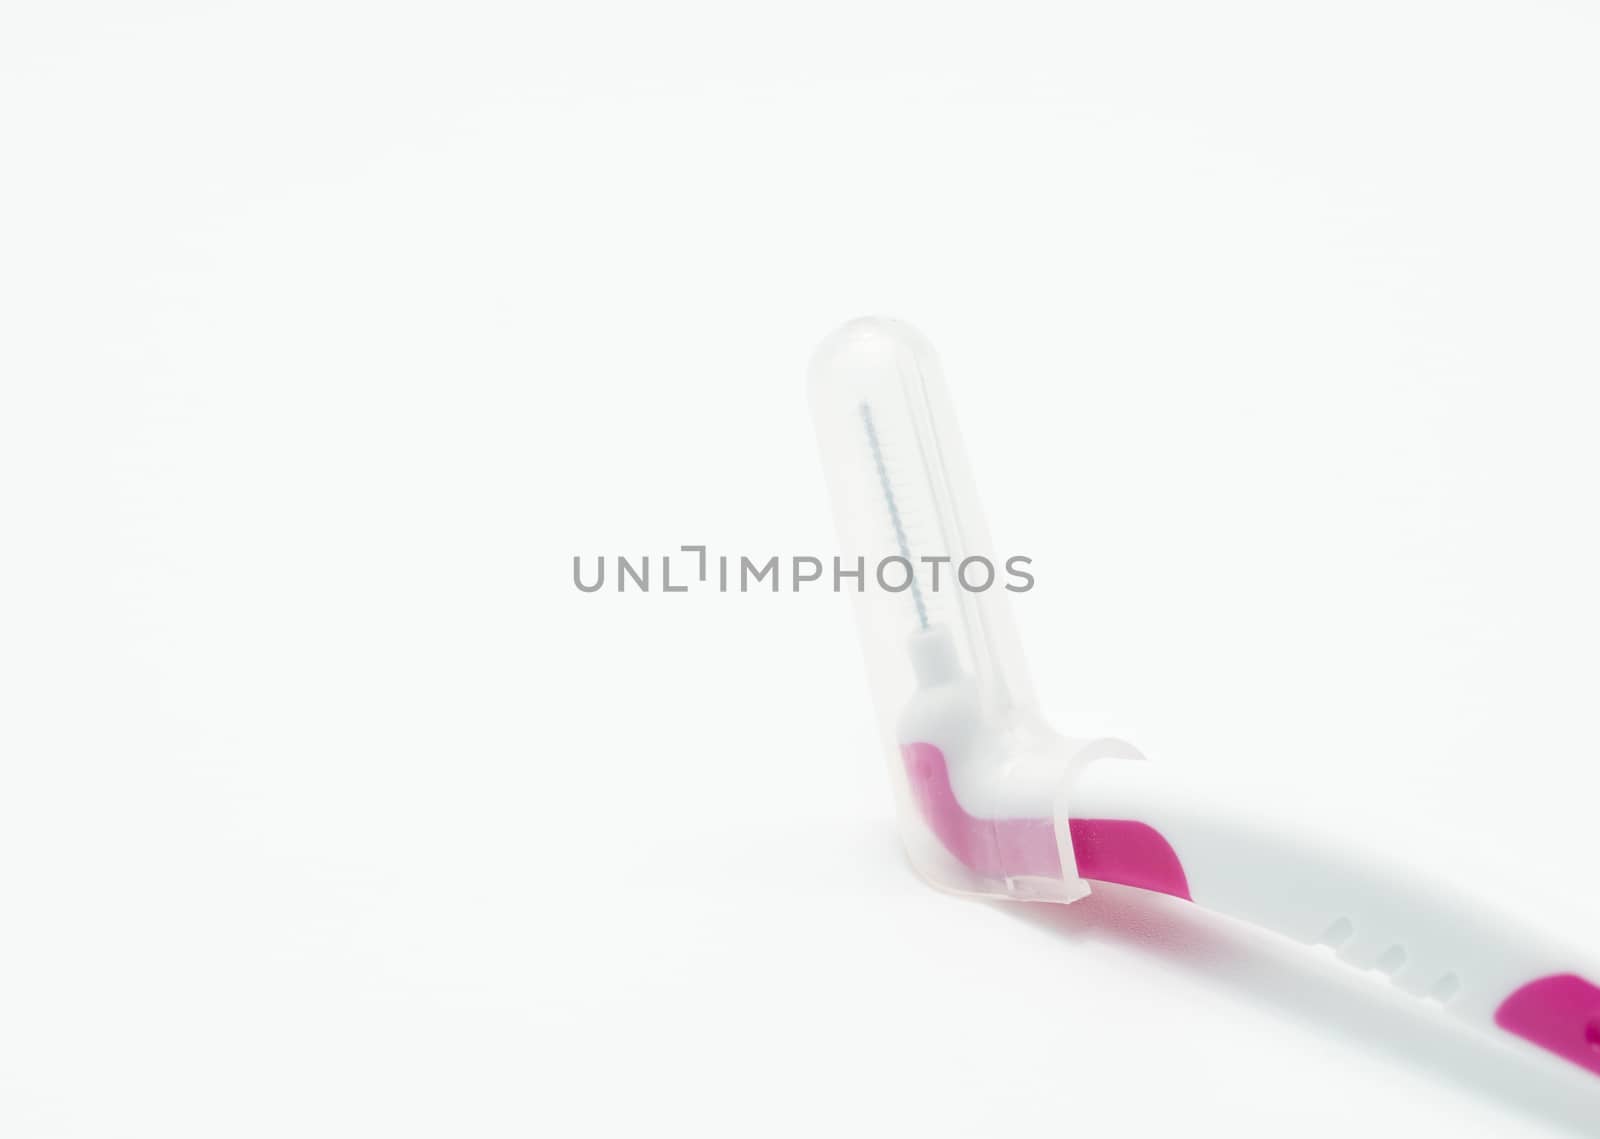 Interdental brush with cover isolated on white background